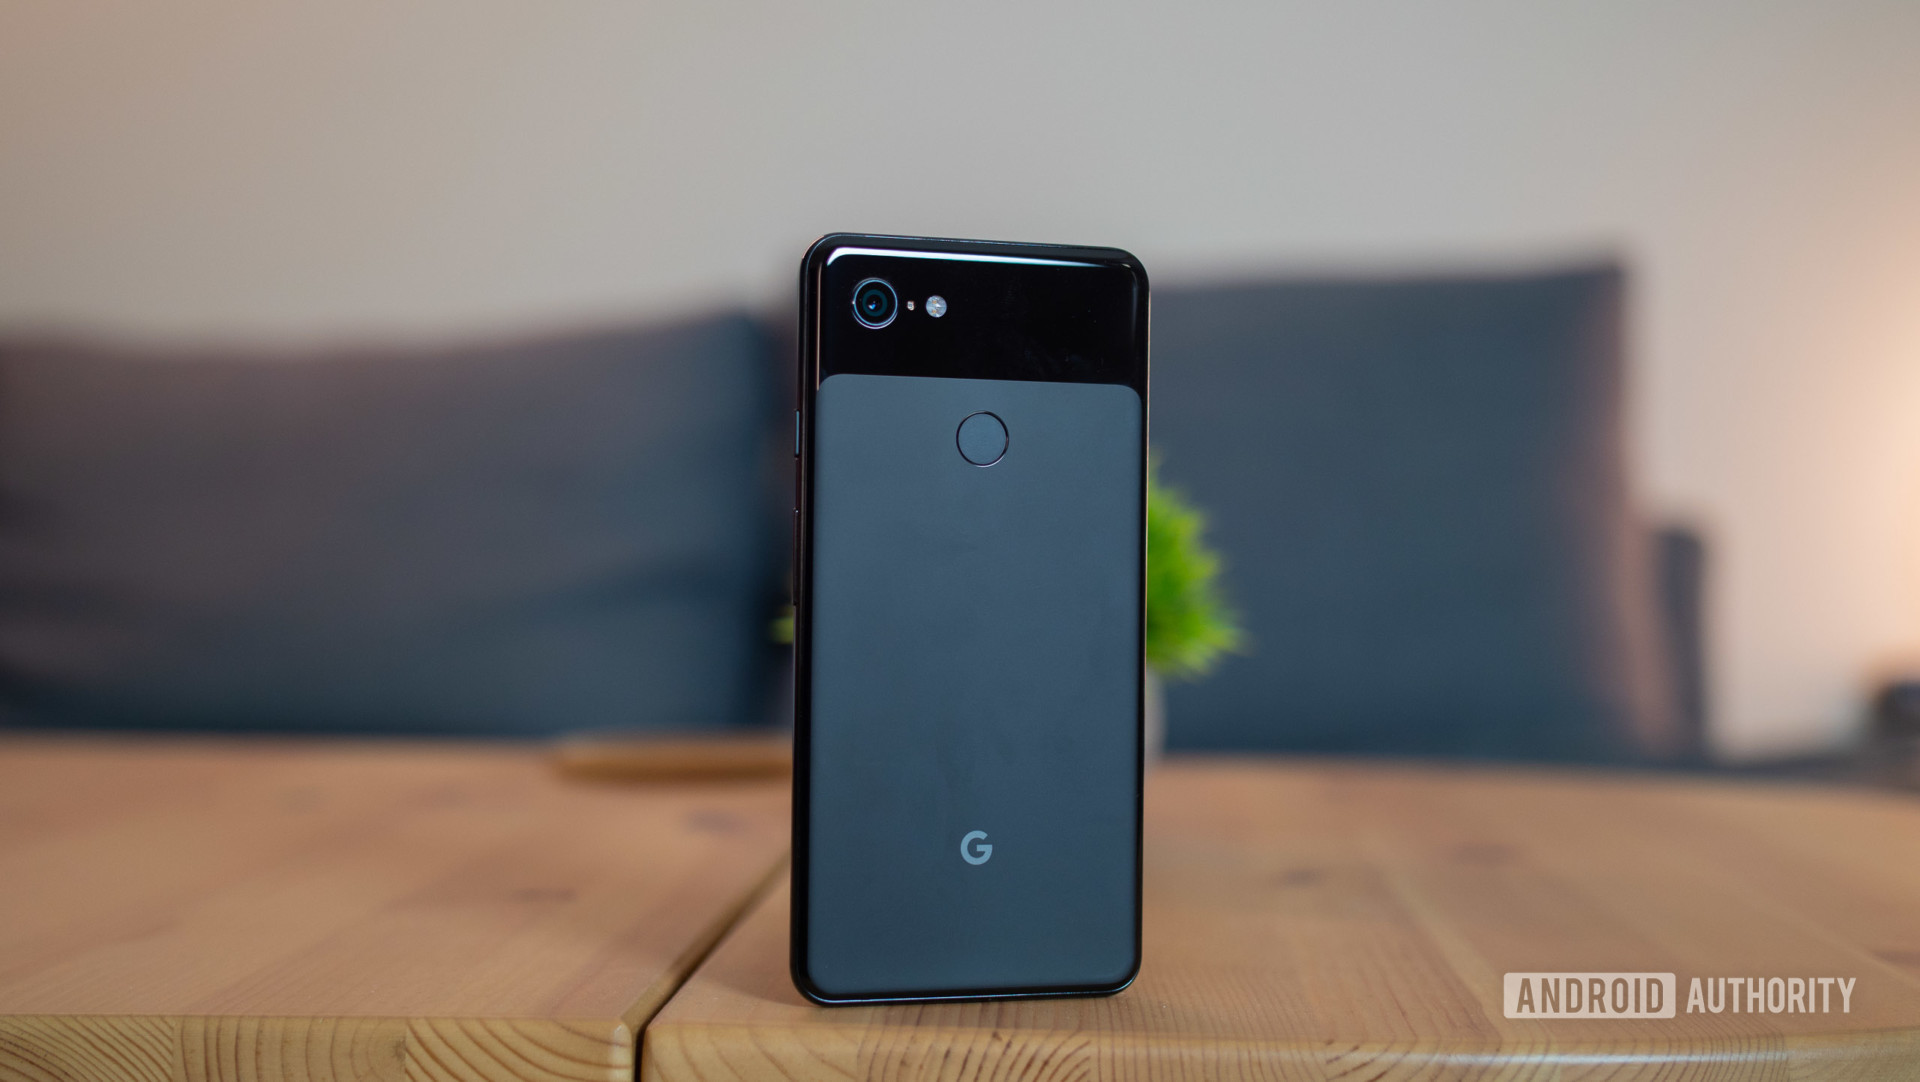 Google Pixel 3 XL from the back